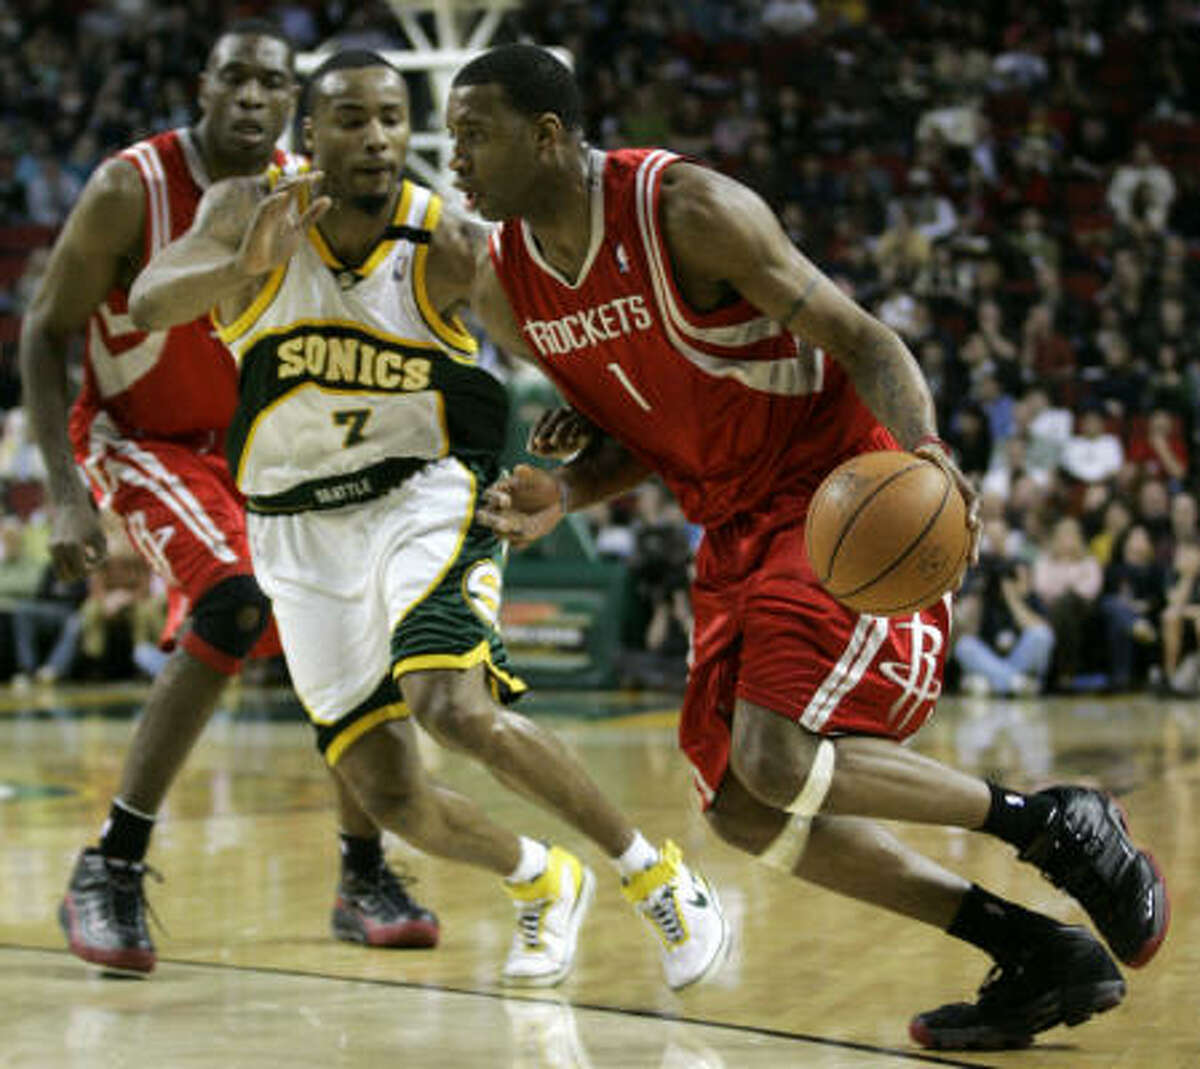 Rockets guard Tracy McGrady, right, takes the ball around SuperSonics forward Rashard Lewis in the first quarter.